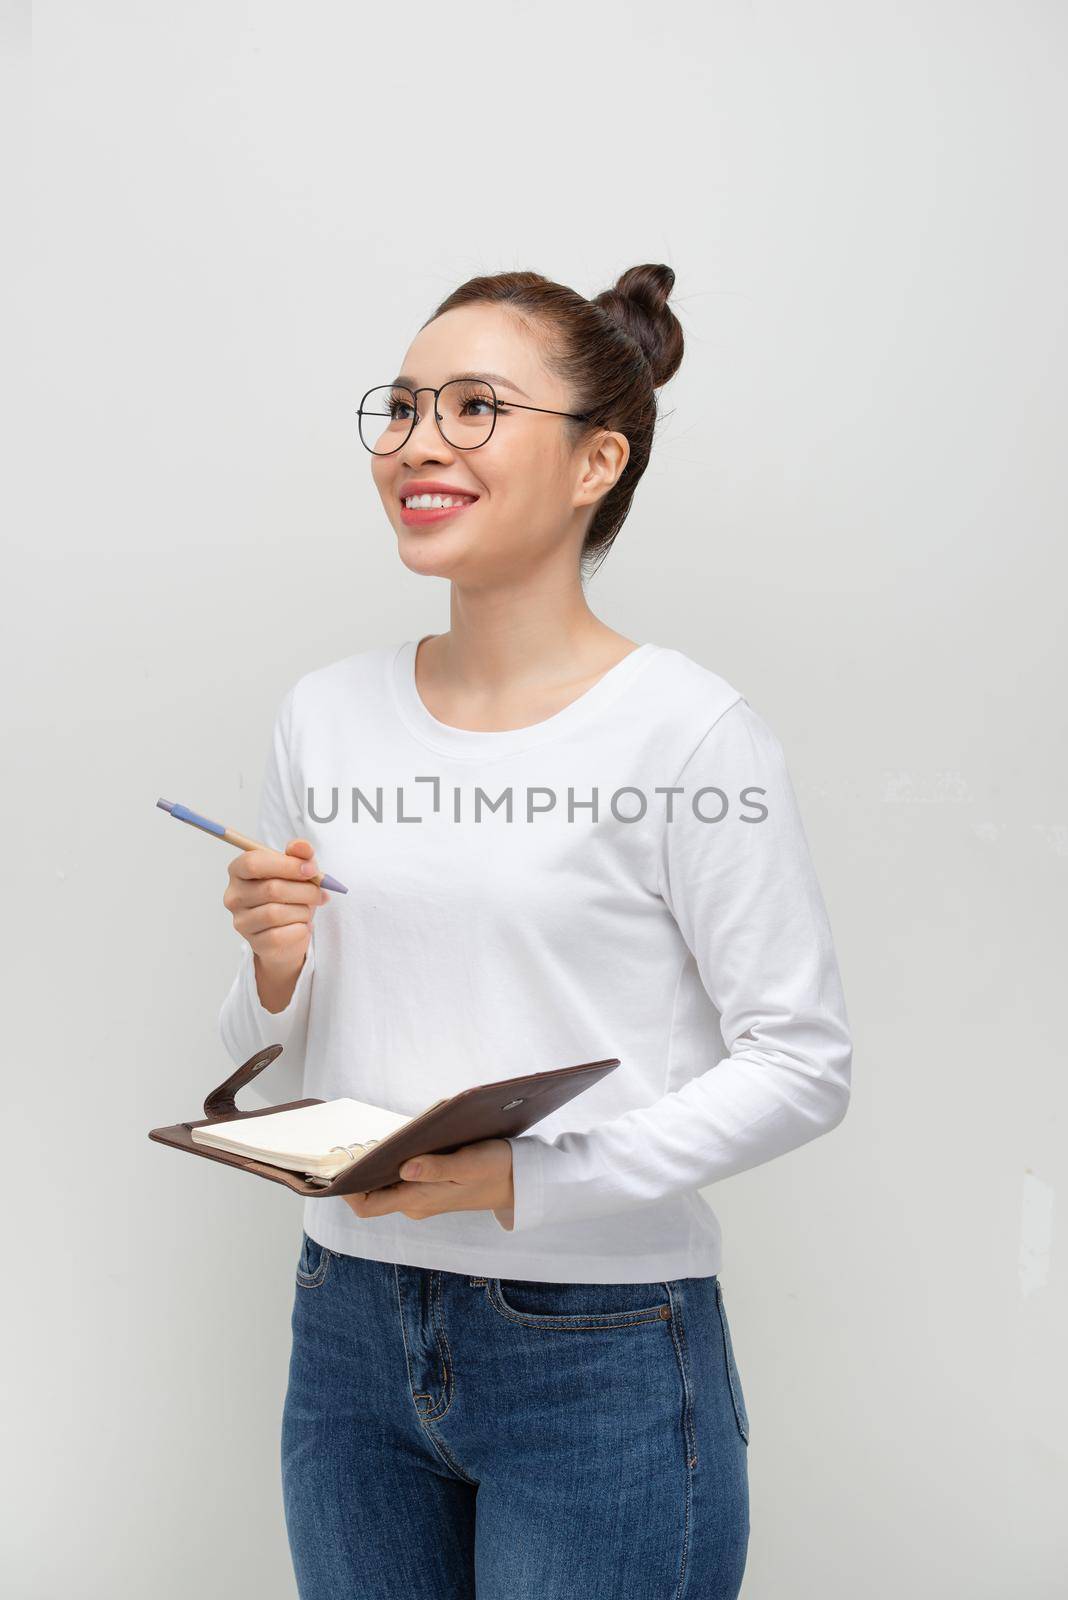 Serious pensive student girl reading her notes, holding pen and open notebook